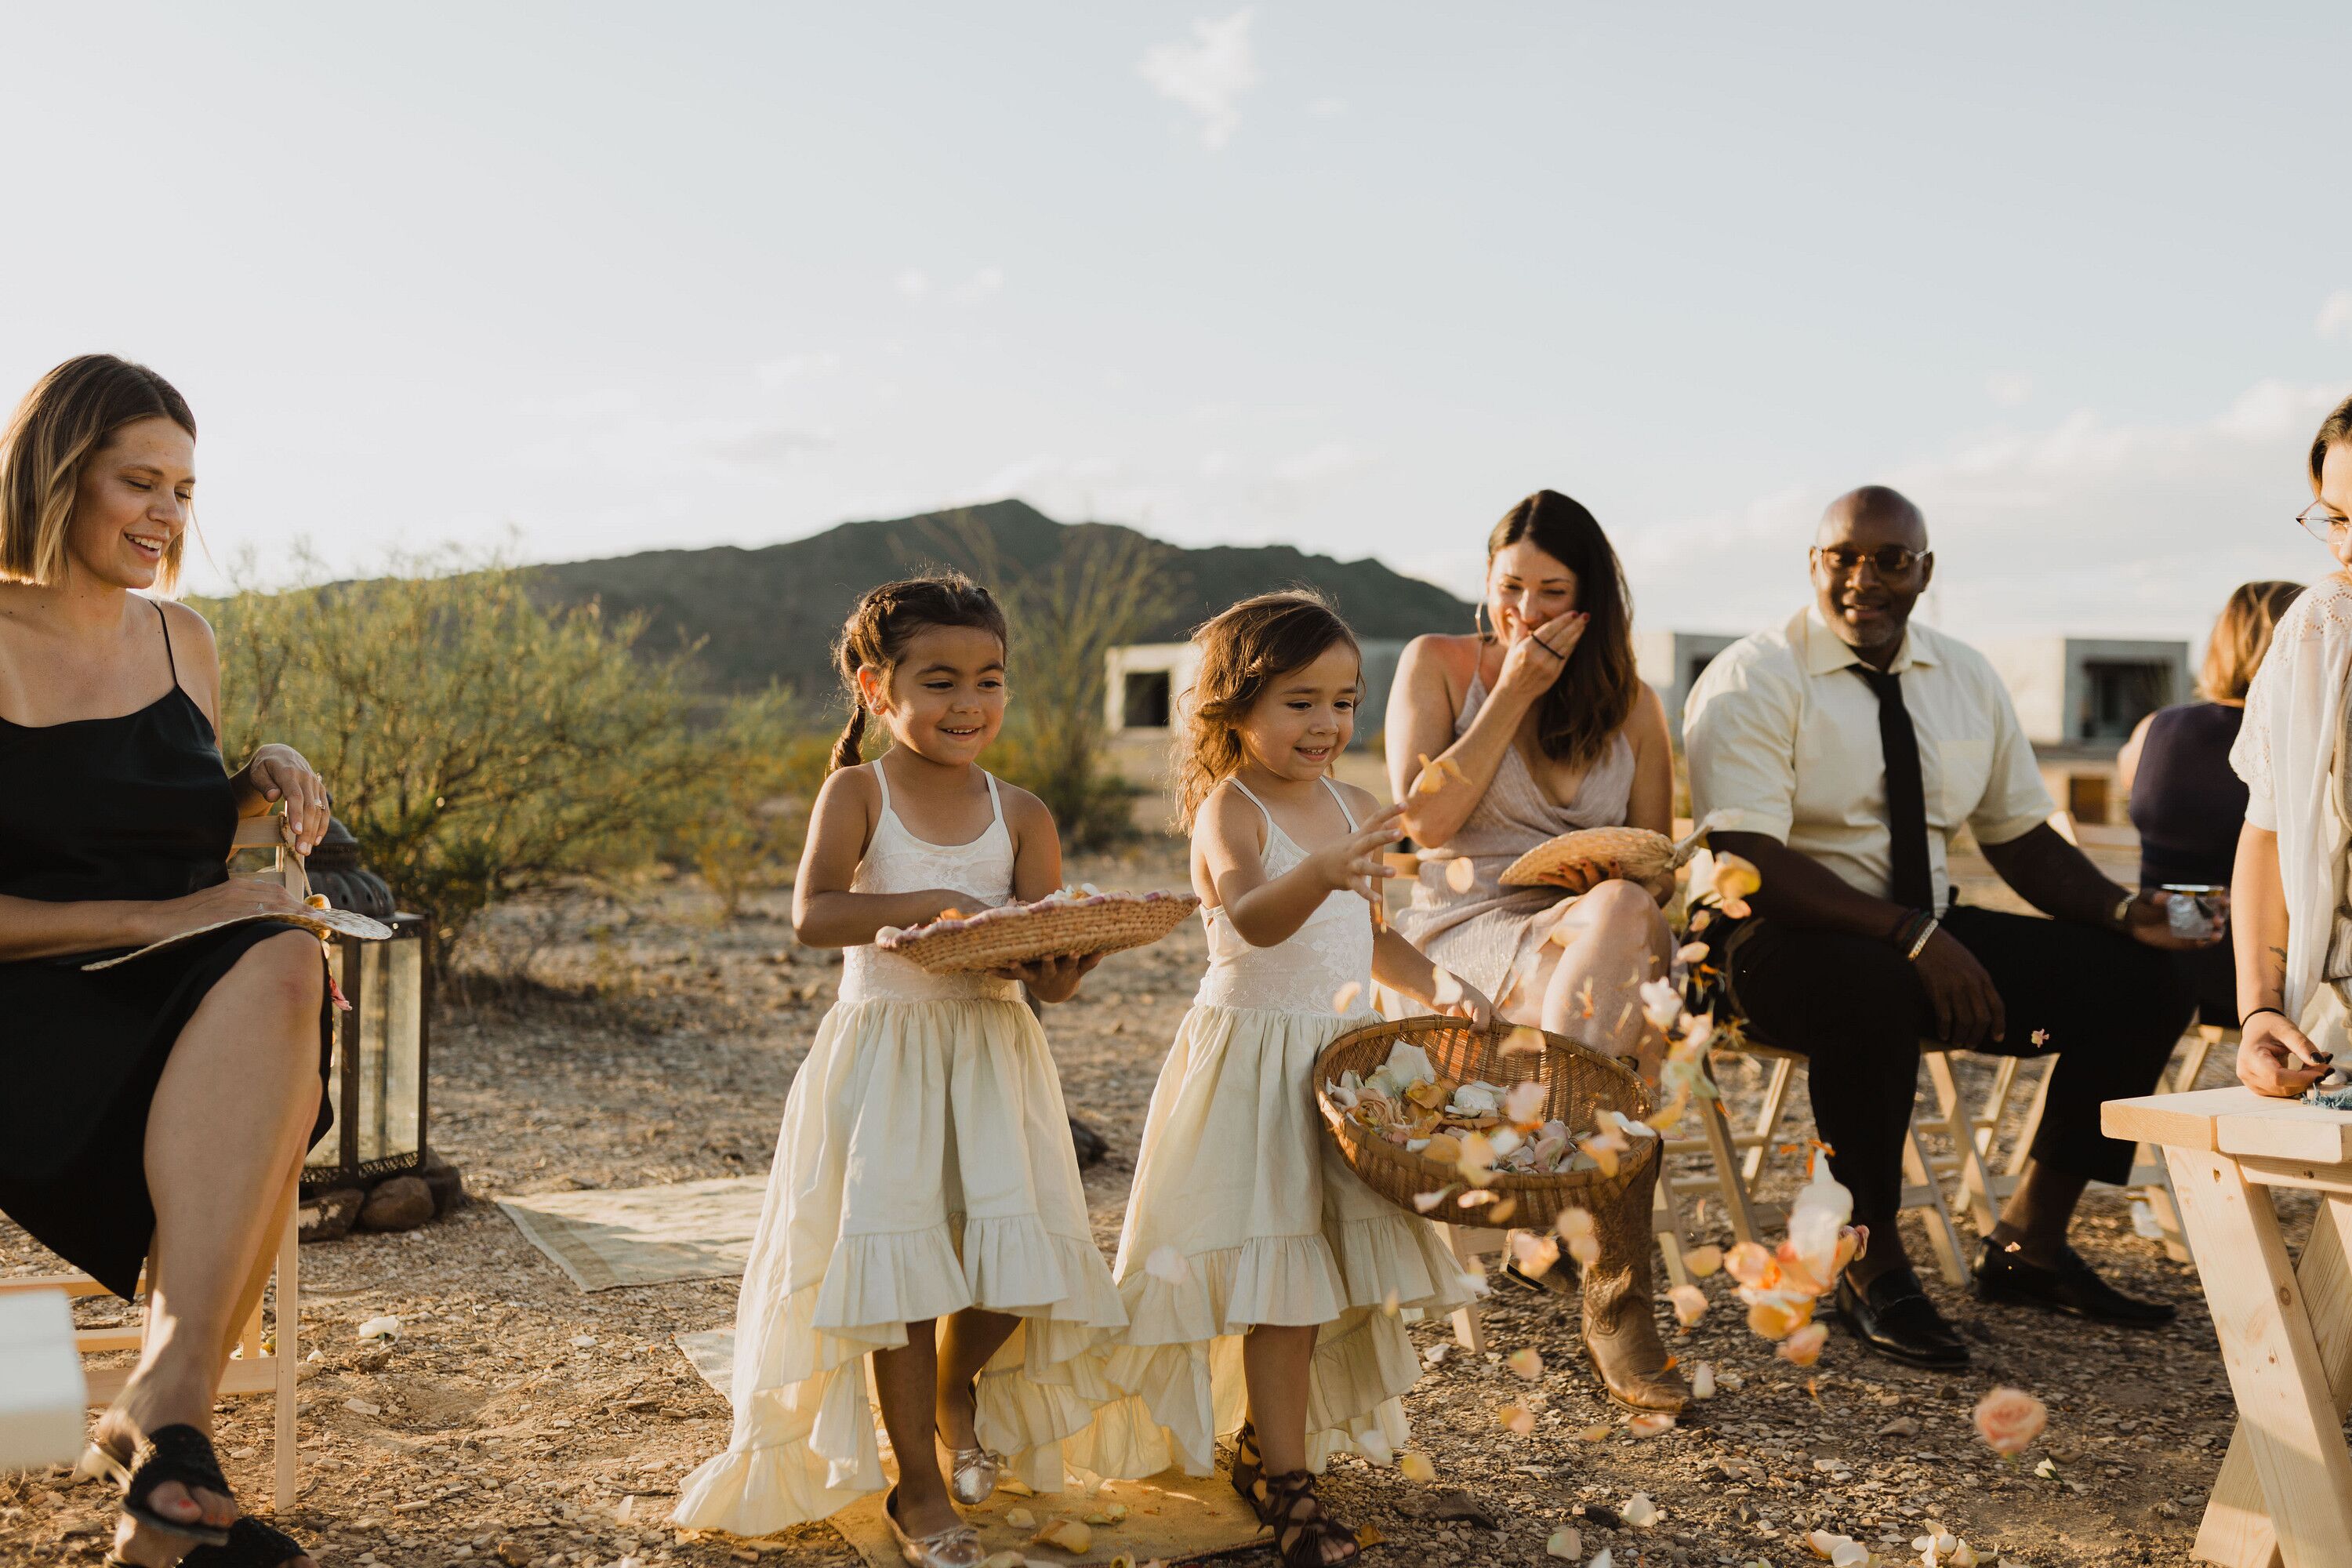 Bohemian Flower Girls with White Dresses and Woven Baskets